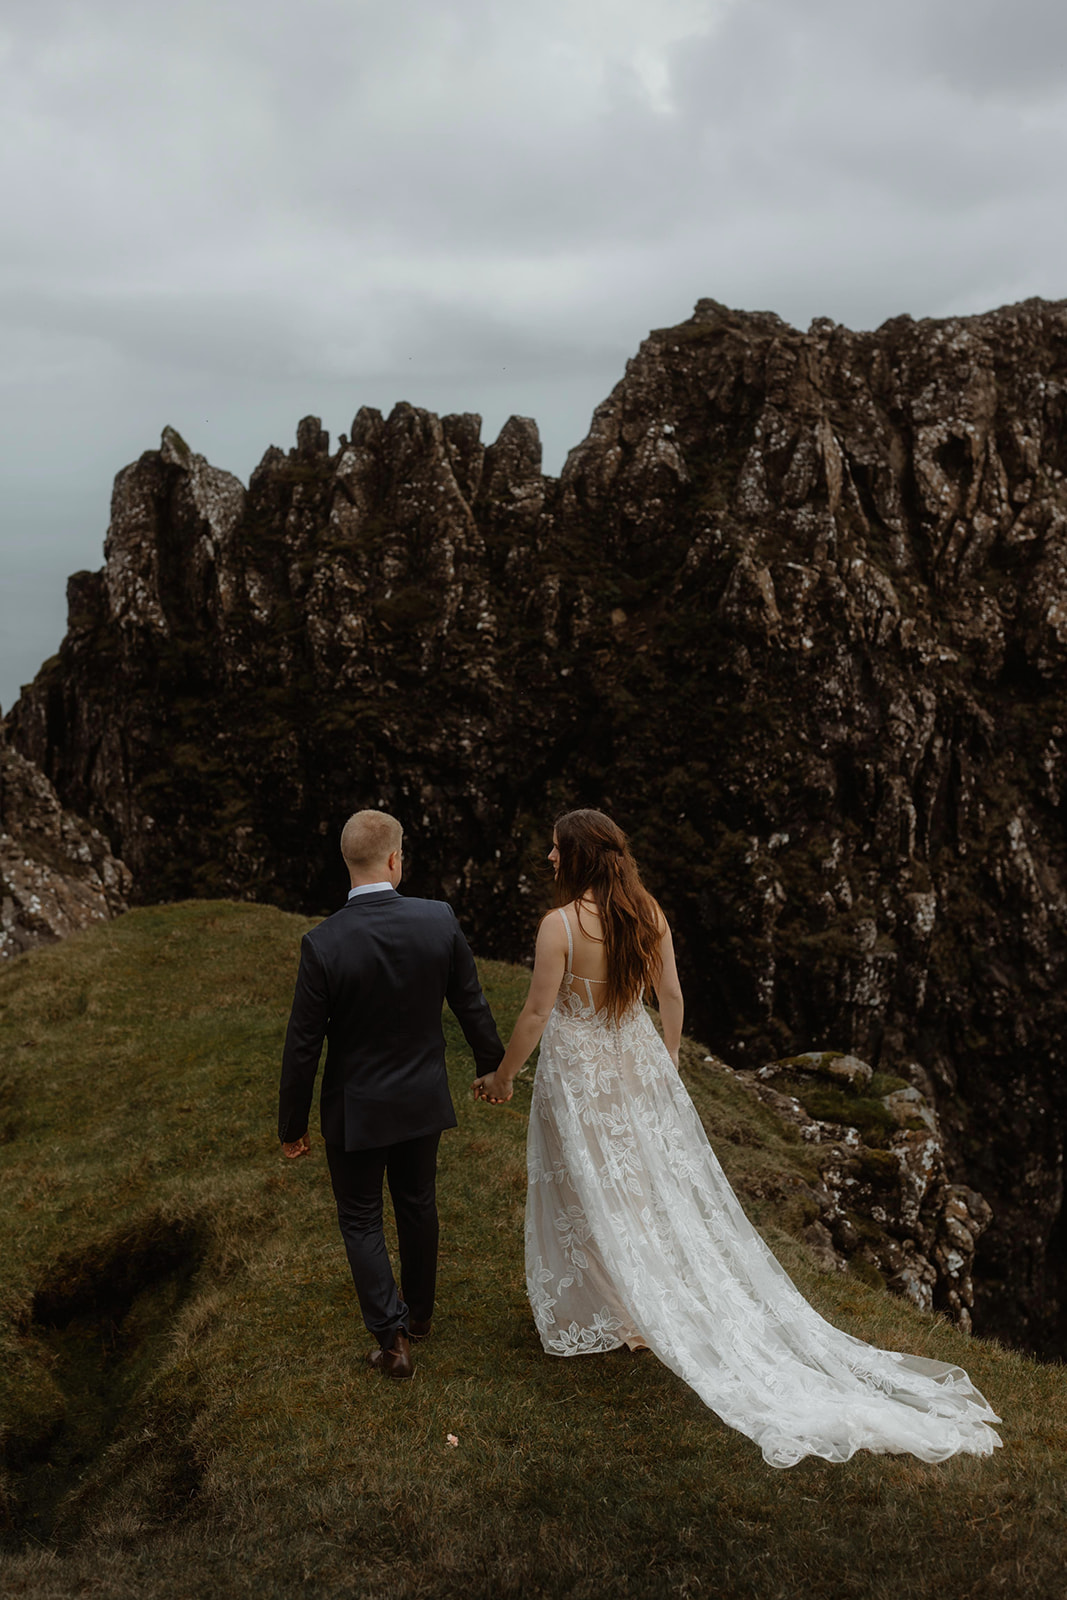 Emma and Matthew shared an intimate moment during their Isle of Skye elopement